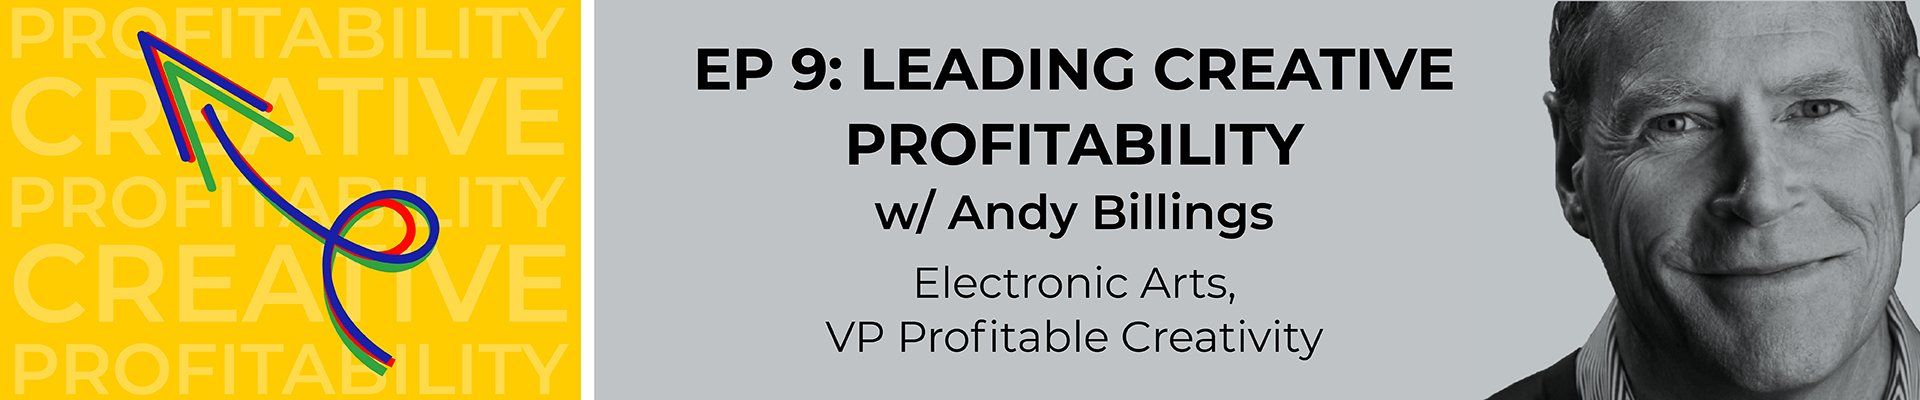 Andy Billings from Electronic Arts talks about leading creative profitability